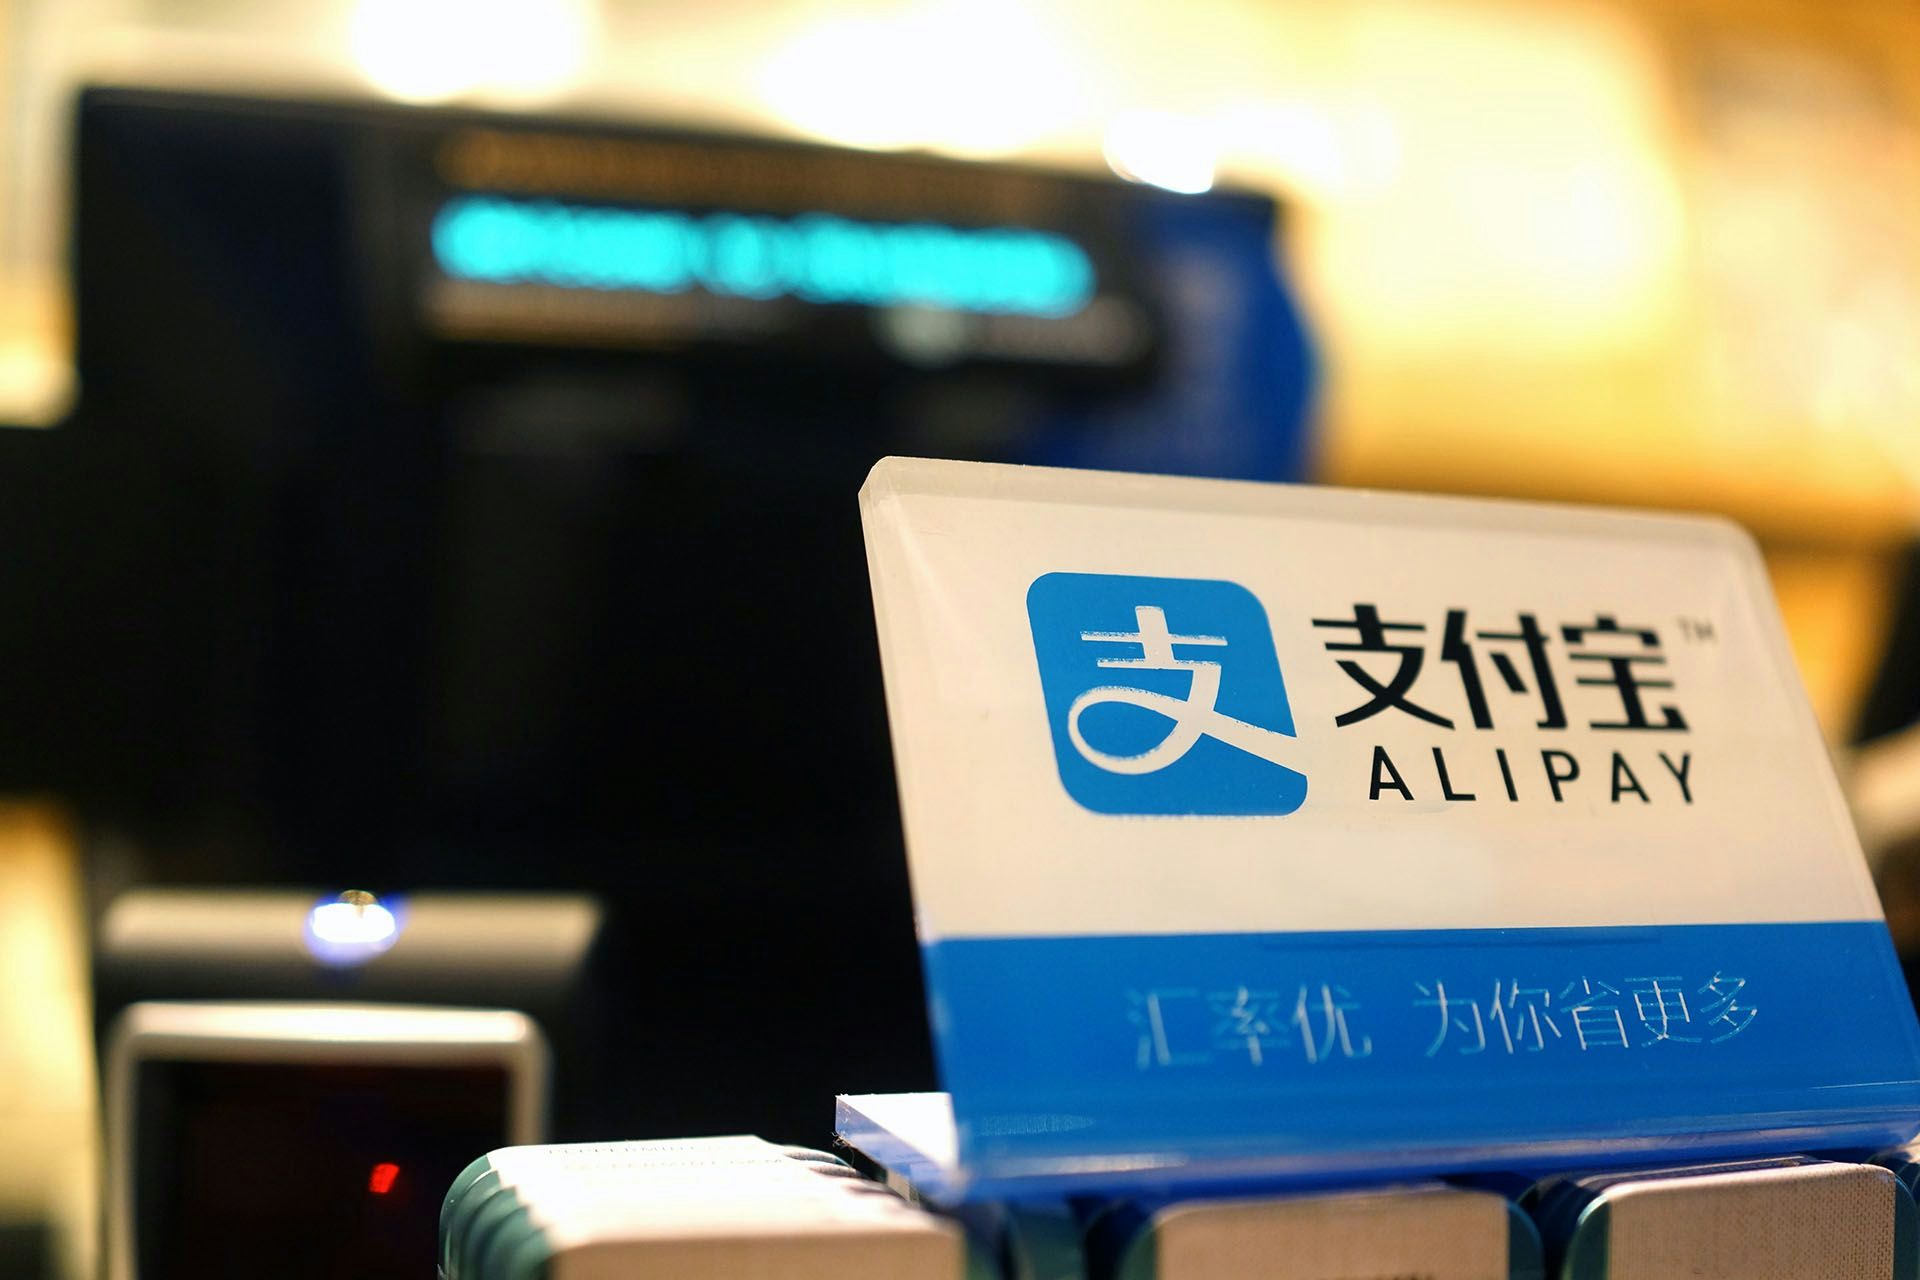 Alipay Transactions Soar 5-Fold On May Holiday Weekend, Show Global Growth